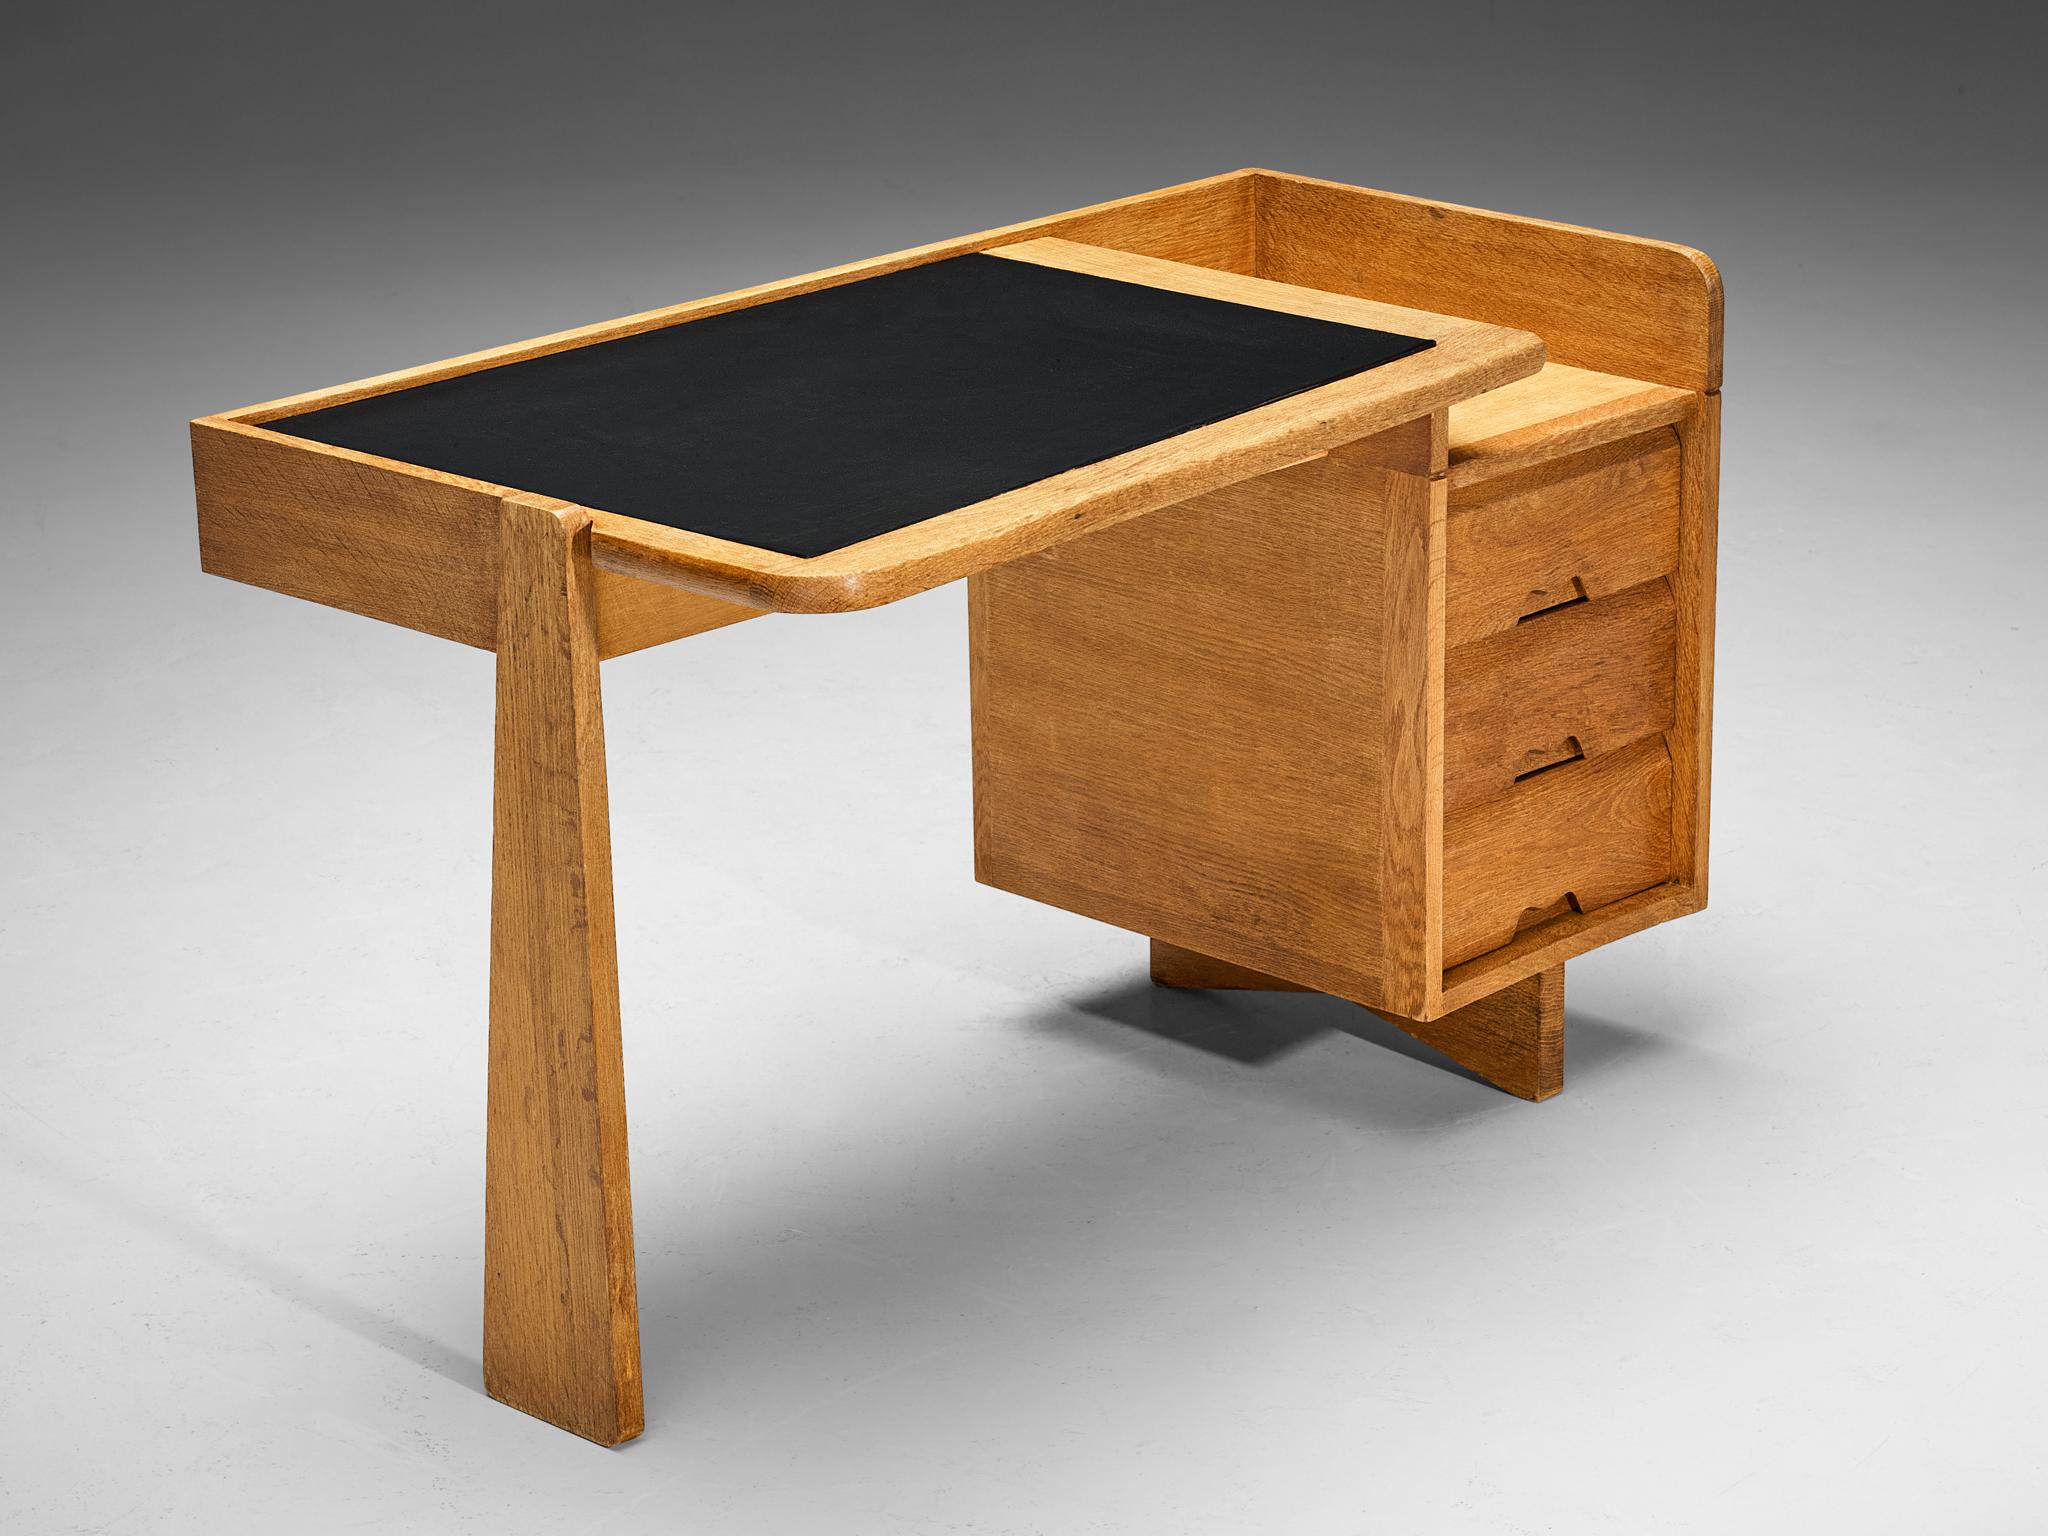 Guillerme et Chambron for Votre Maison, writing desk, oak, leather, France, 1960s.

This desk is designed by the renowned French duo Guillerme et Chambron. This design holds an utterly well-balanced construction supported by the characteristic